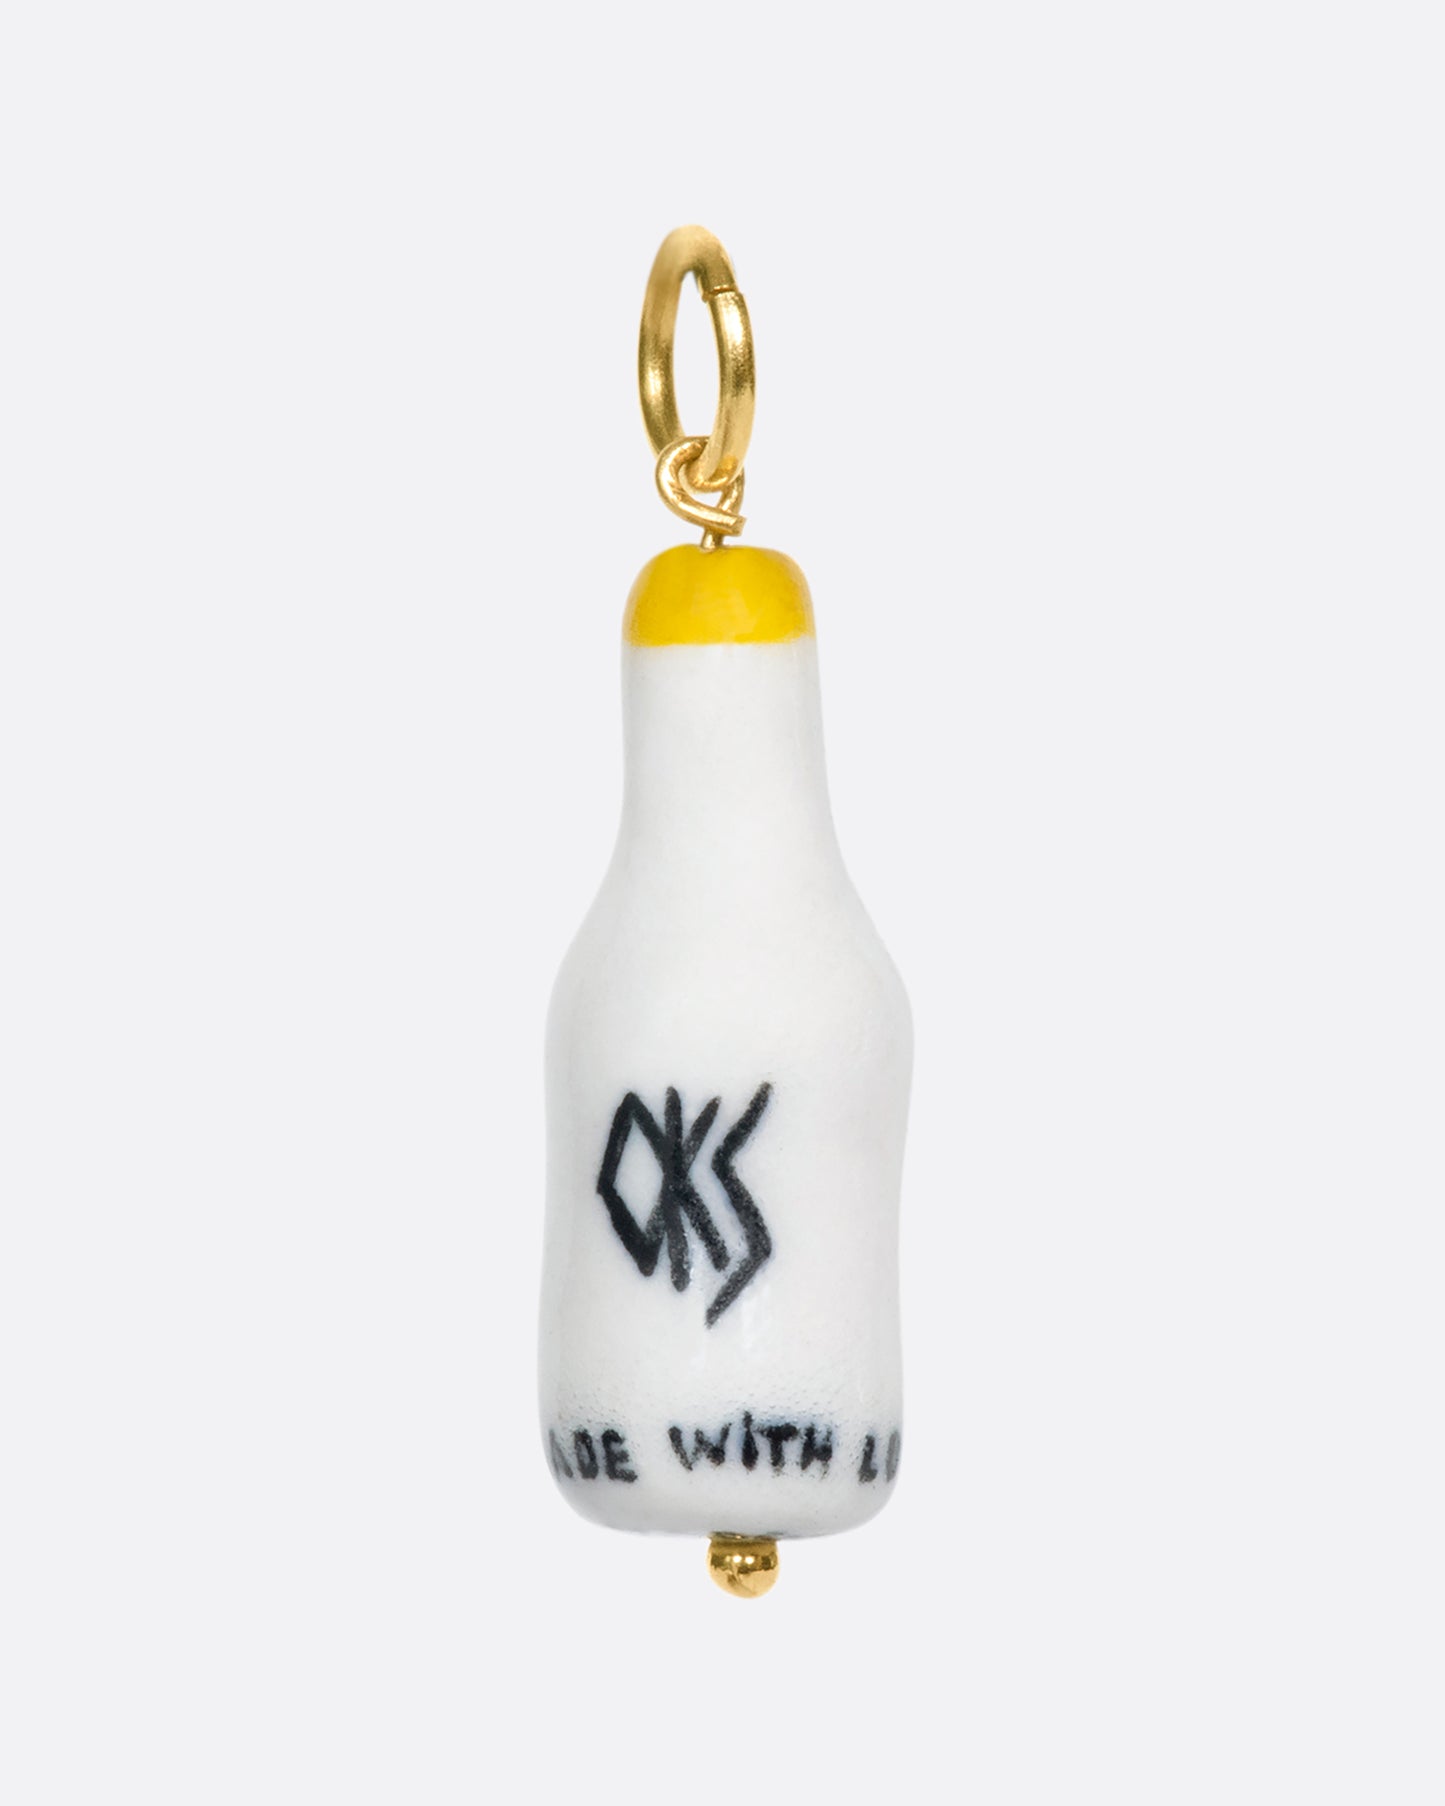 A handmade and painted porcelain Tito's Vodka charm with a 14k gold bail.